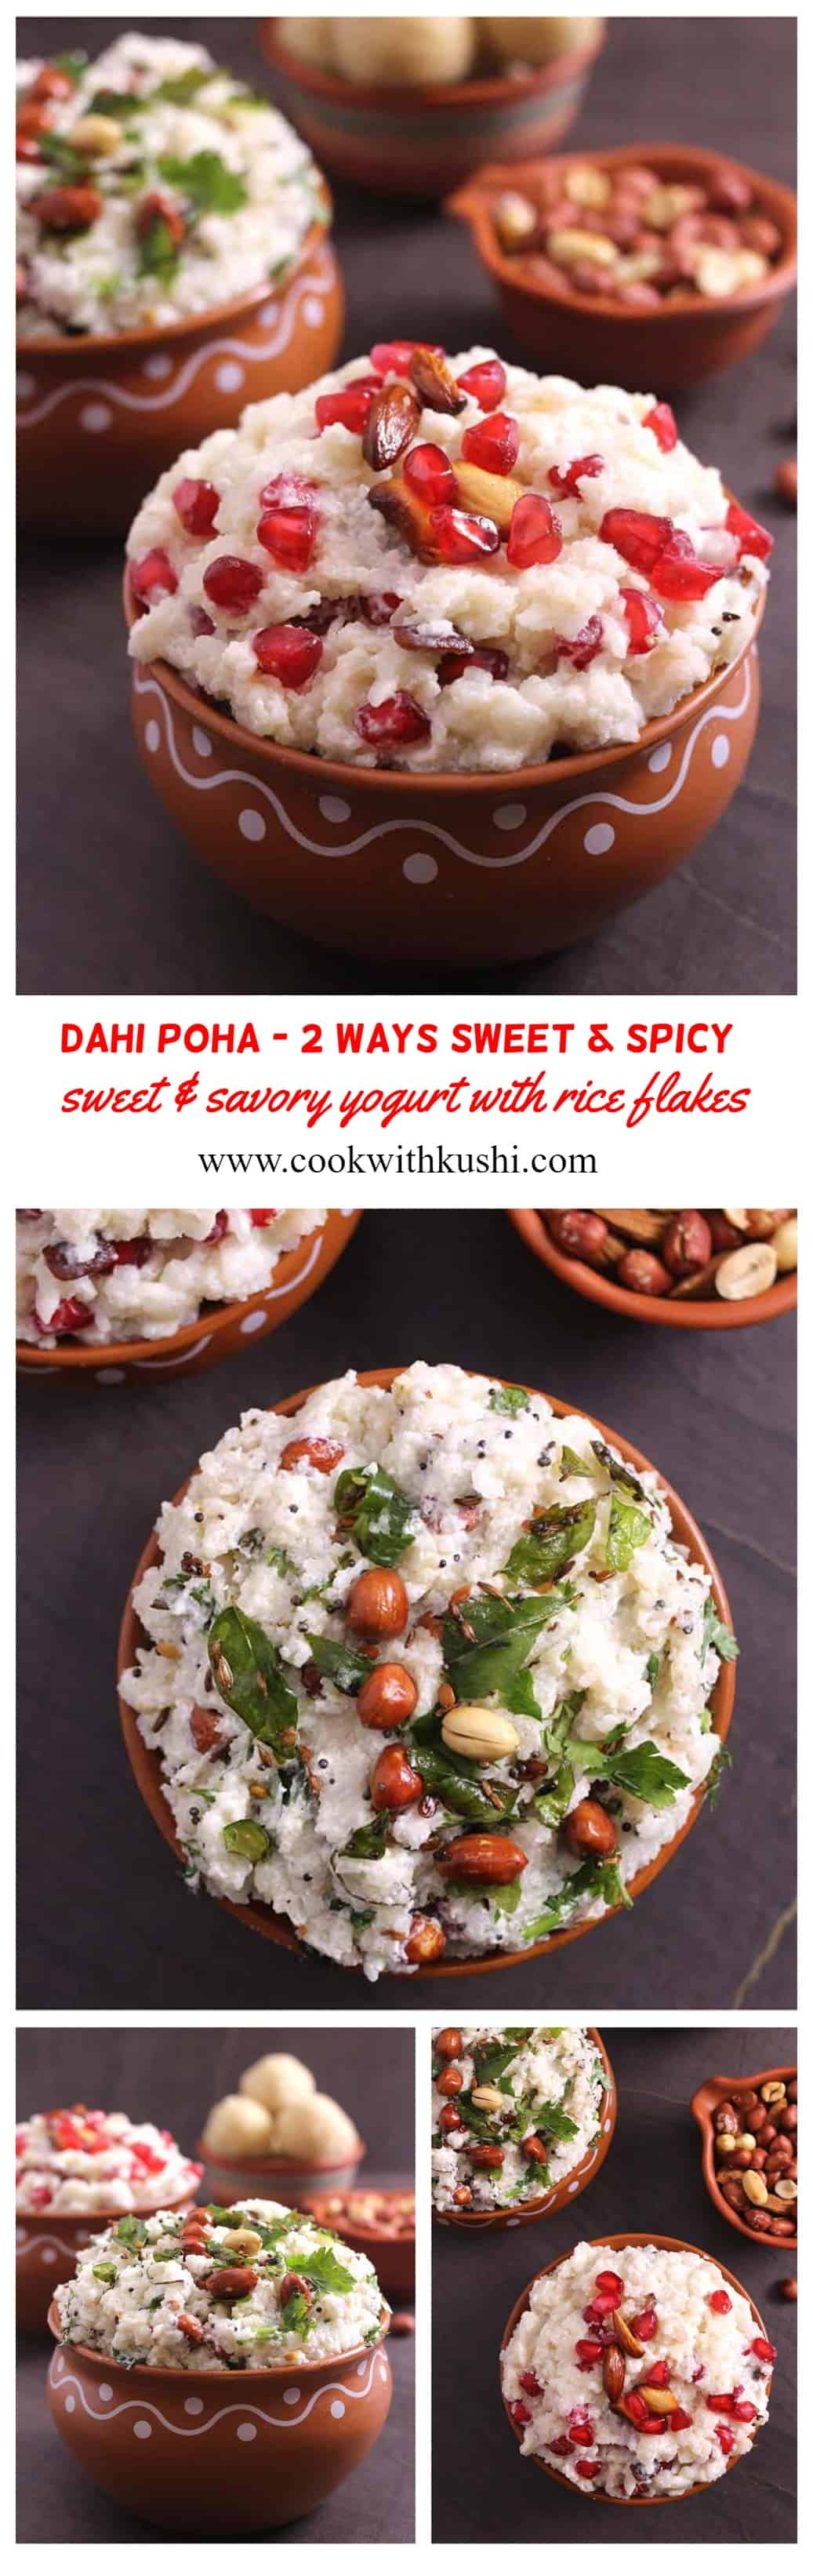 Dahi Poha (Curd Poha or Yogurt with rice flakes), is quick and easy to make, cooling and refreshing recipe prepared in 2 ways (sweet & spicy version) in less than 20 minutes. No cooking required. Only tempering.